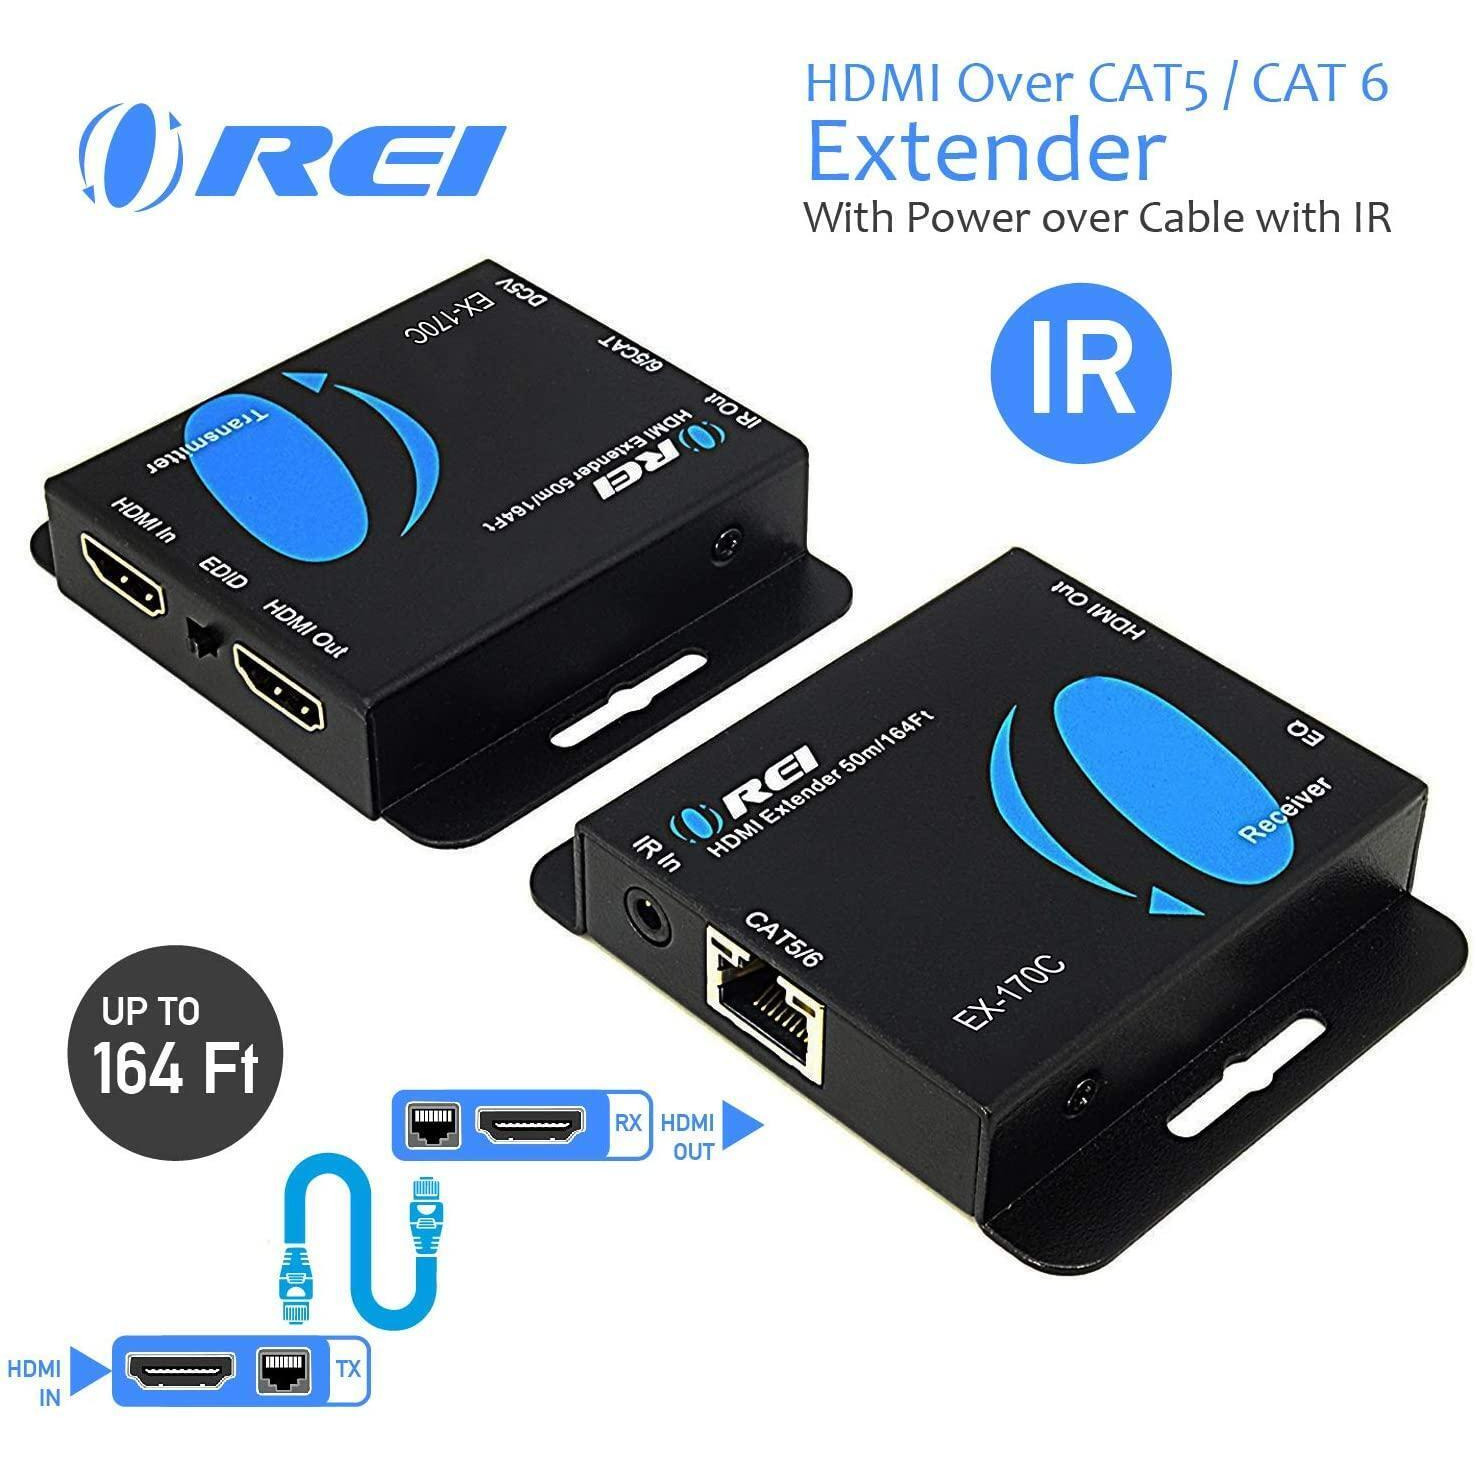 HDMI Extender Over CAT5/CAT6 by OREI with IR Upto 164 Feet - Loop Out - 1080P Full HD Signal Distribution (EX-170C) alternate image